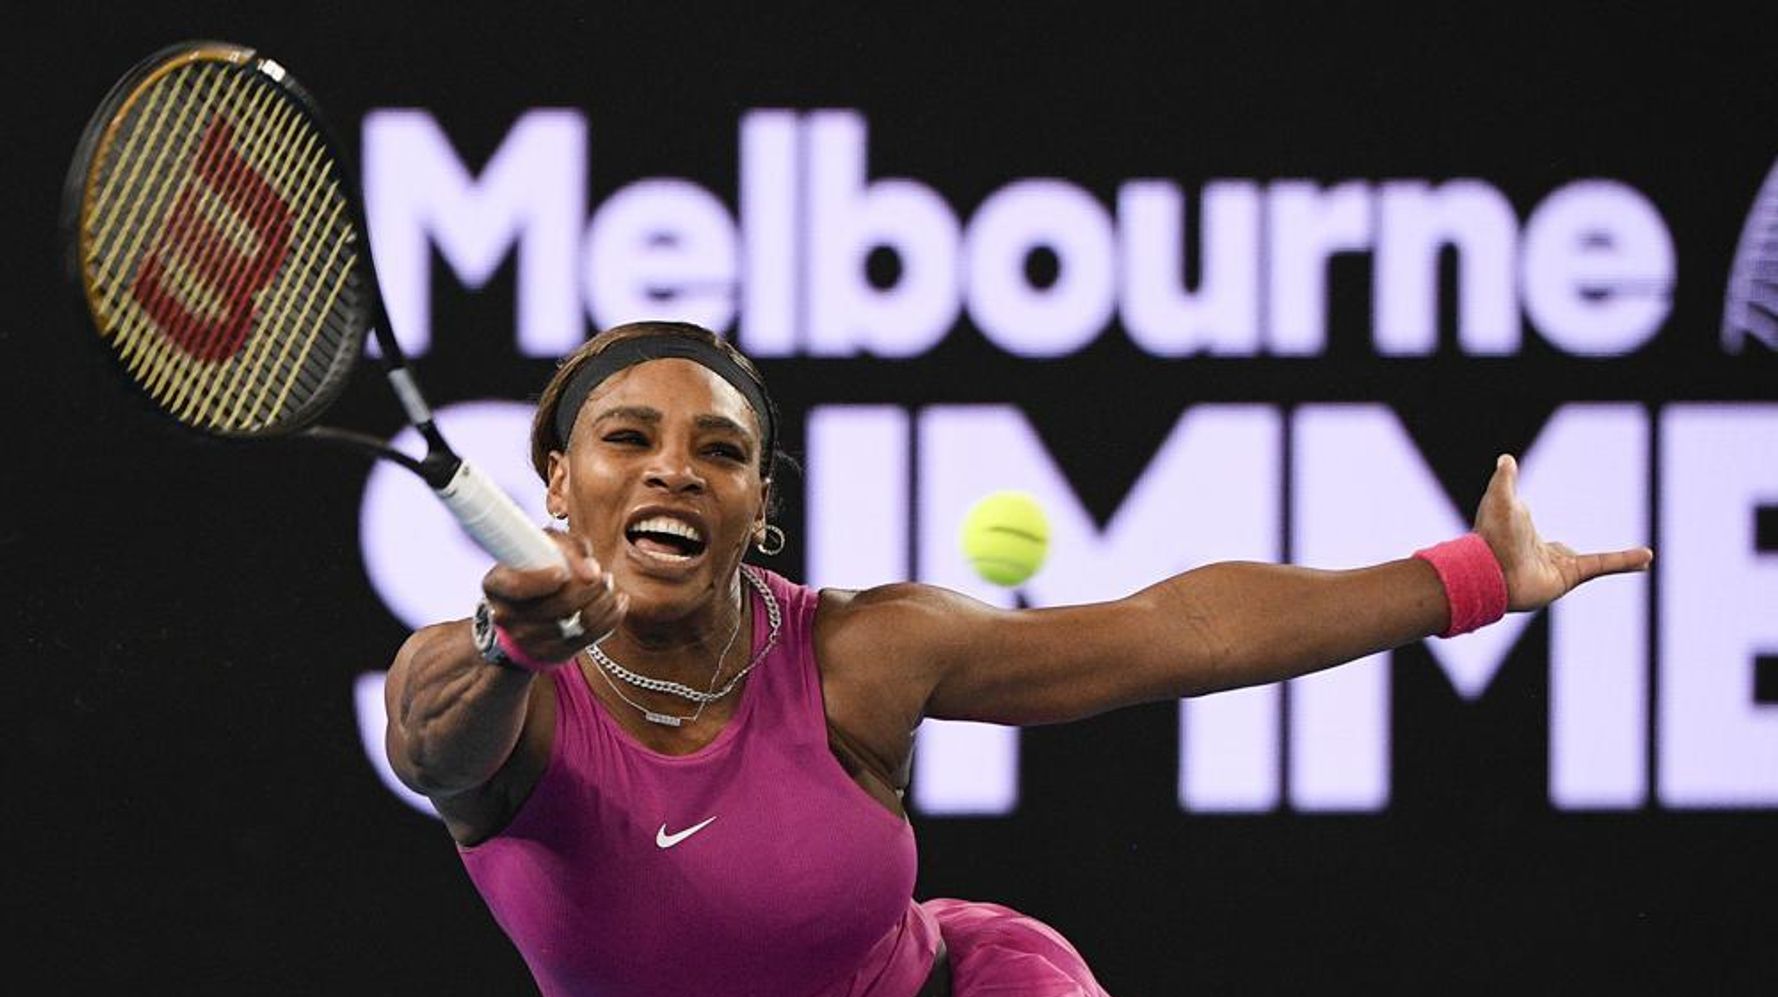 Serena Williams Won’t Play Australian Open: ‘Not Where I
Need To Be Physically’